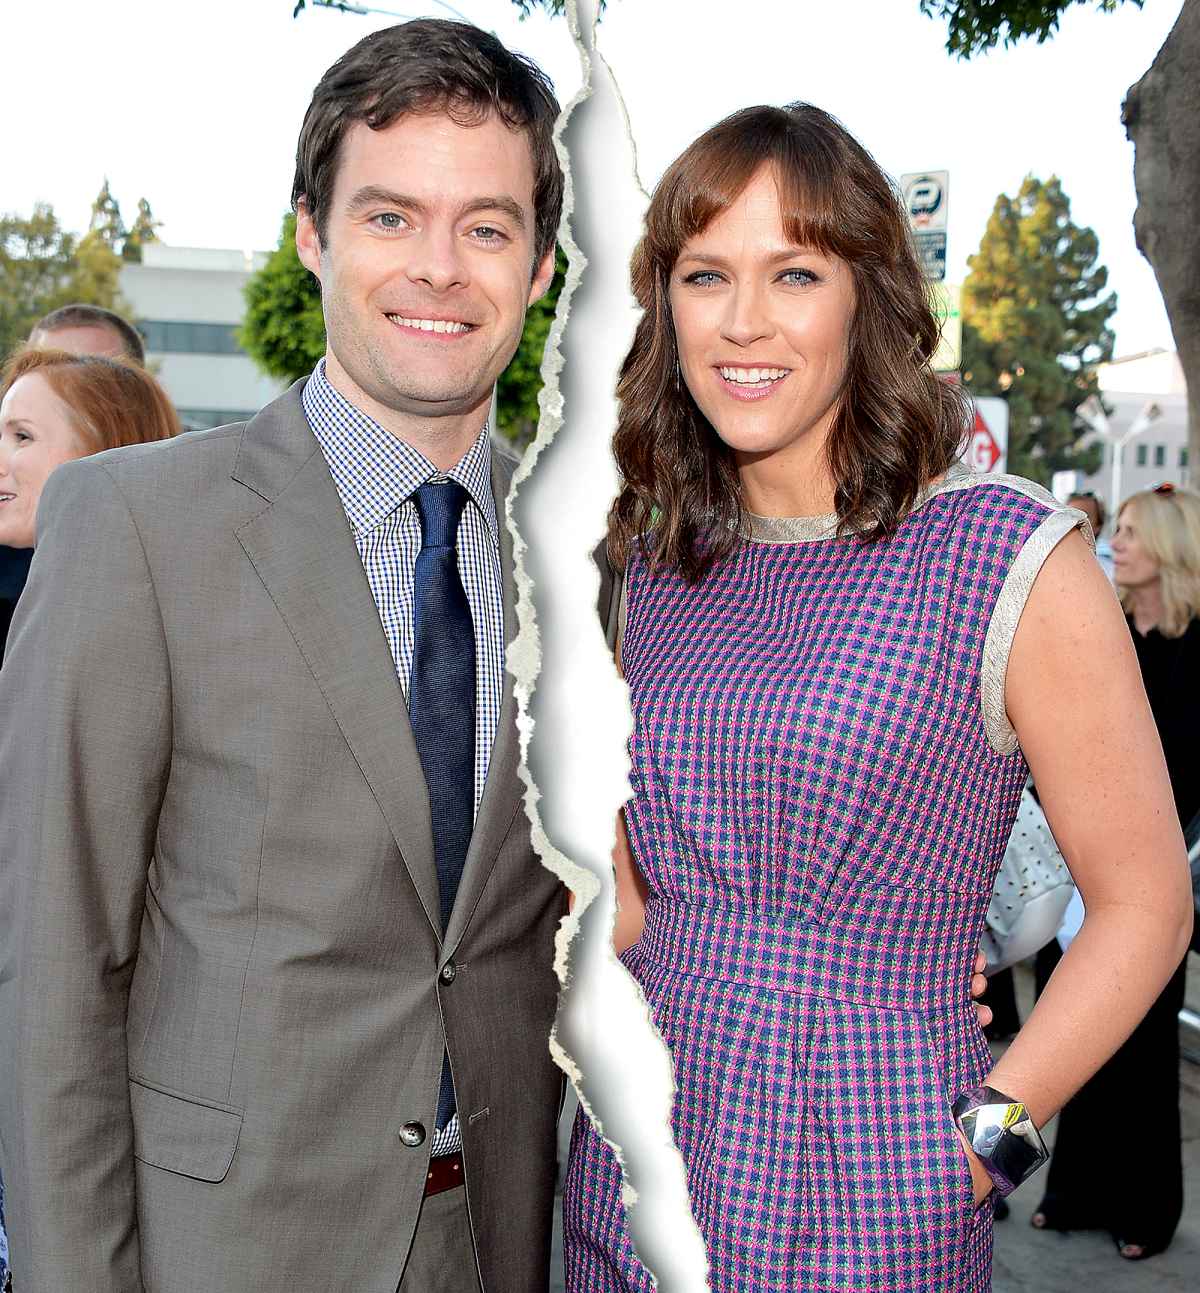 Bill Hader Divorcing Wife Maggie Carey After 11 Years of Marriage